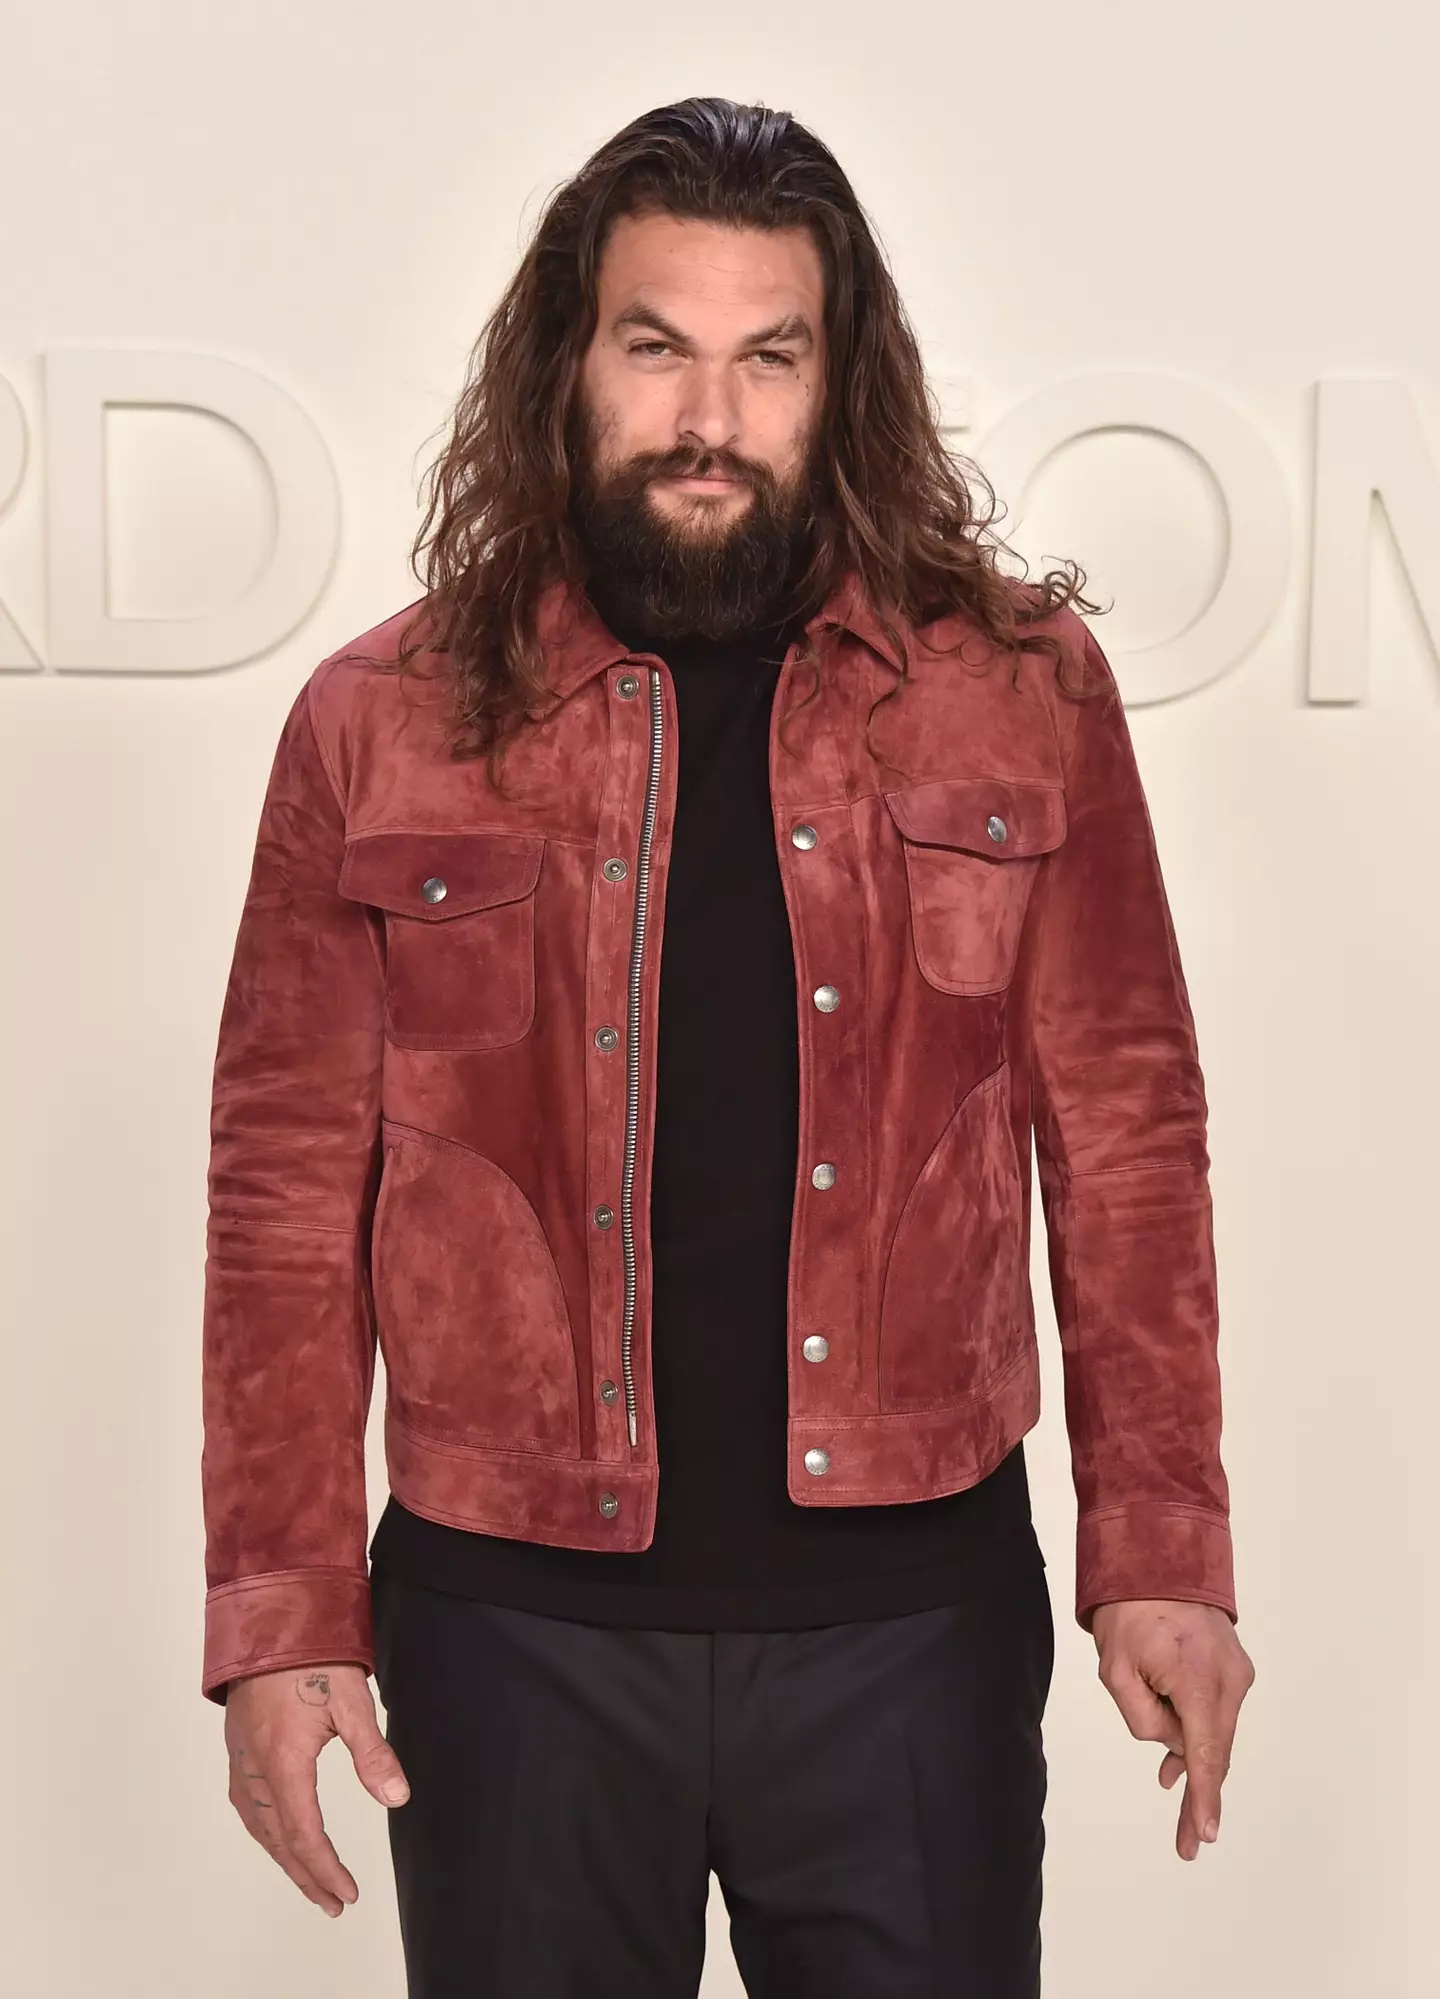 Jason Momoa was involved in a ‘head-on crash with a motorcyclist’ in LA on Sunday.